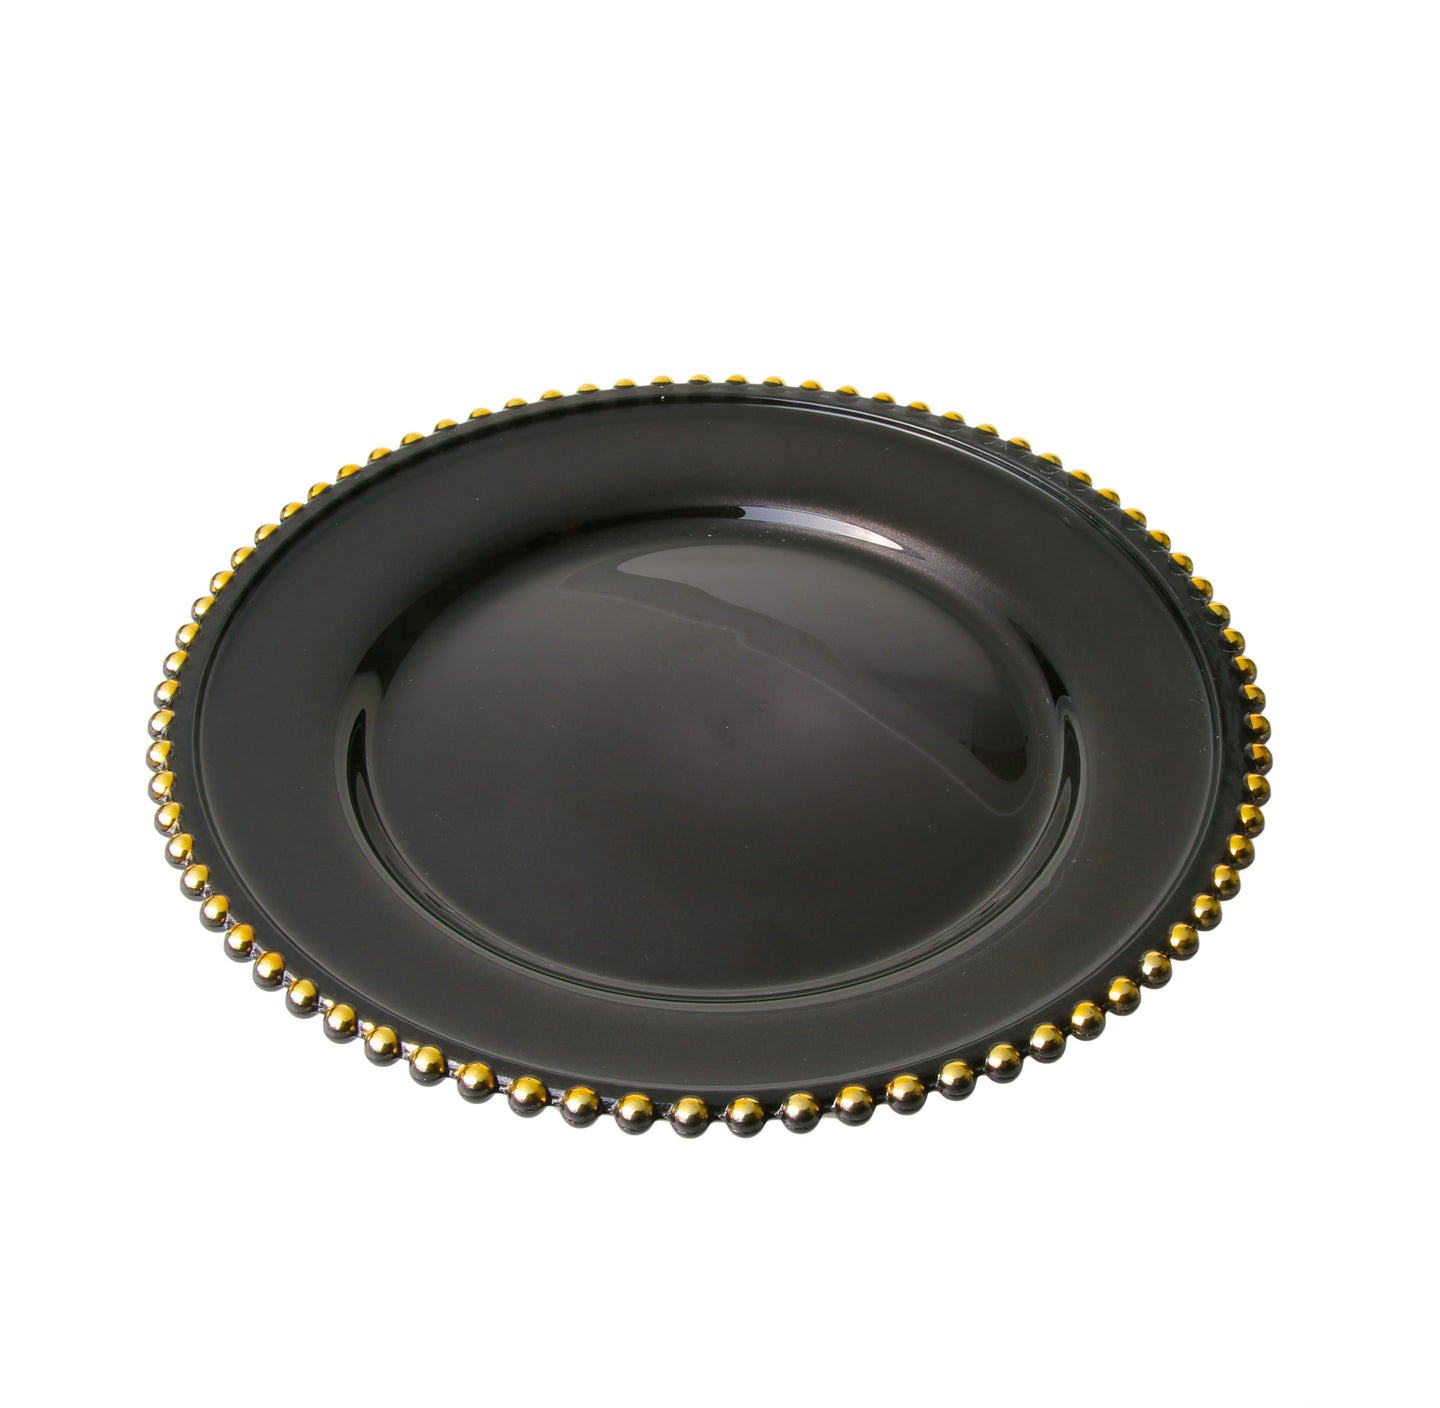 Set Of 4 Black Chargers With Gold Beaded Rim - 13